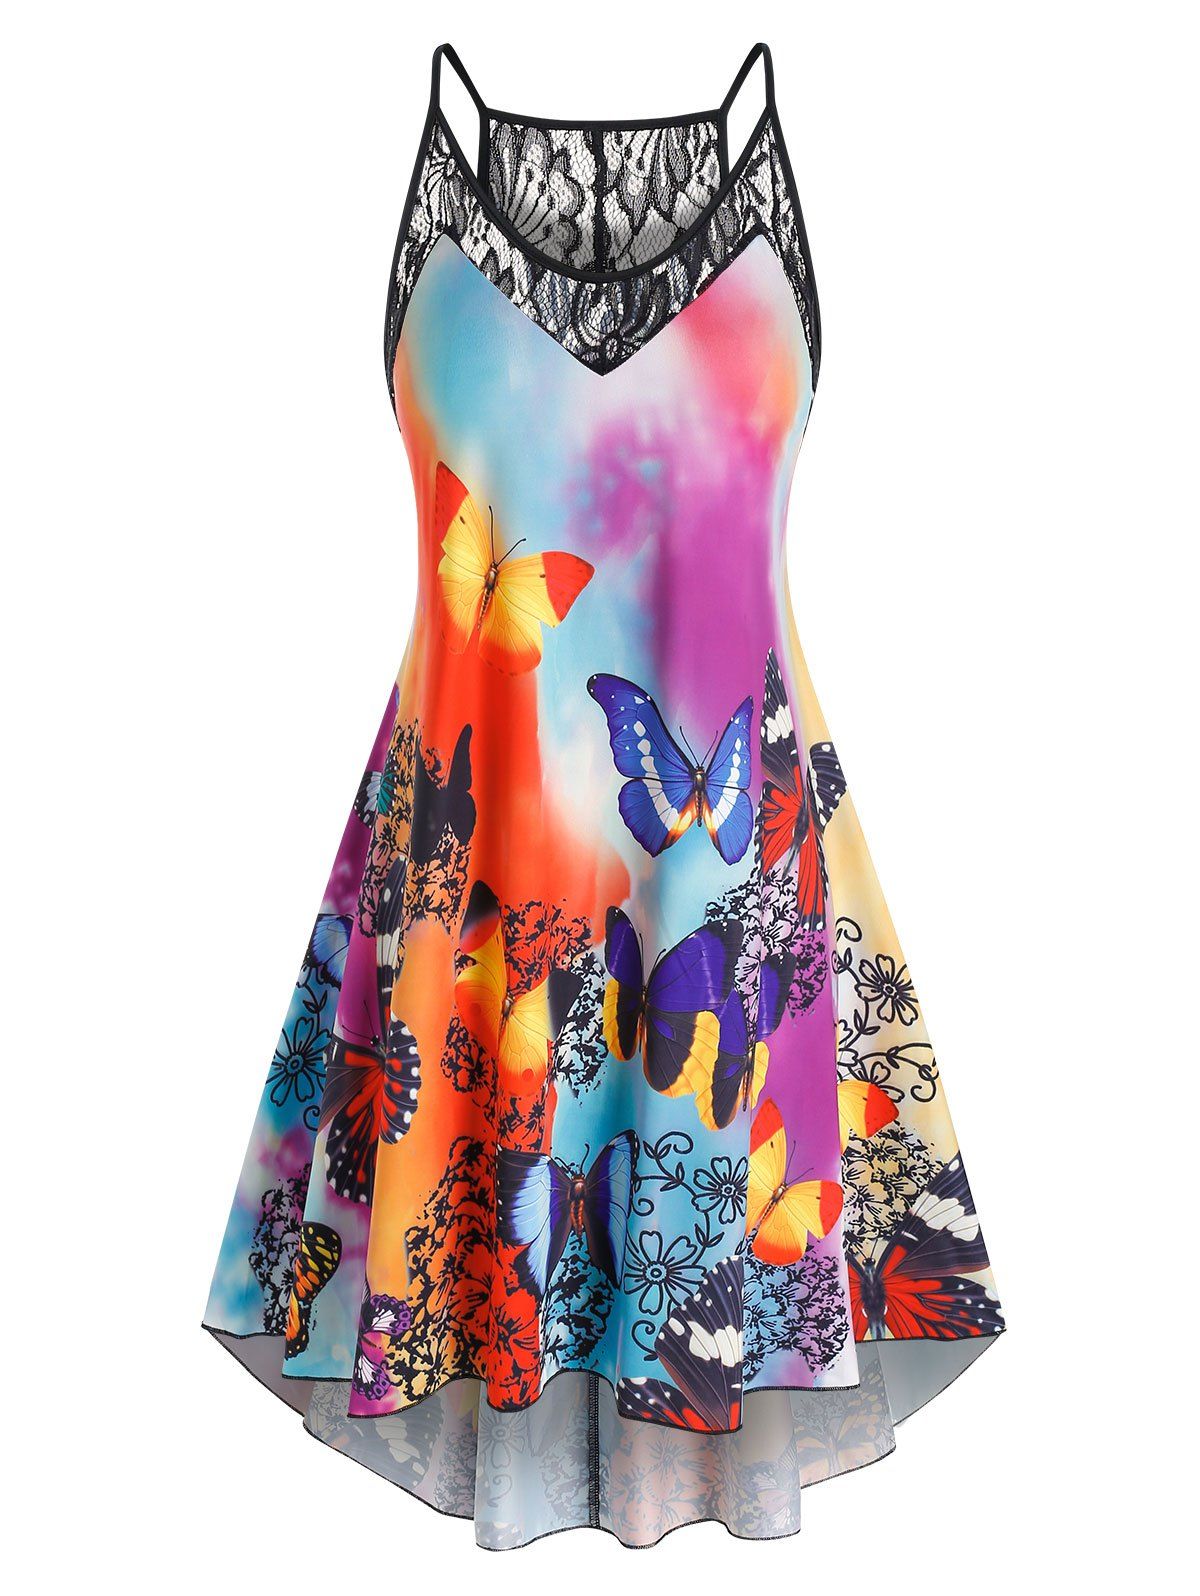 Plus Size Lace Panel Butterfly Print High Low Dress - multicolor 5X